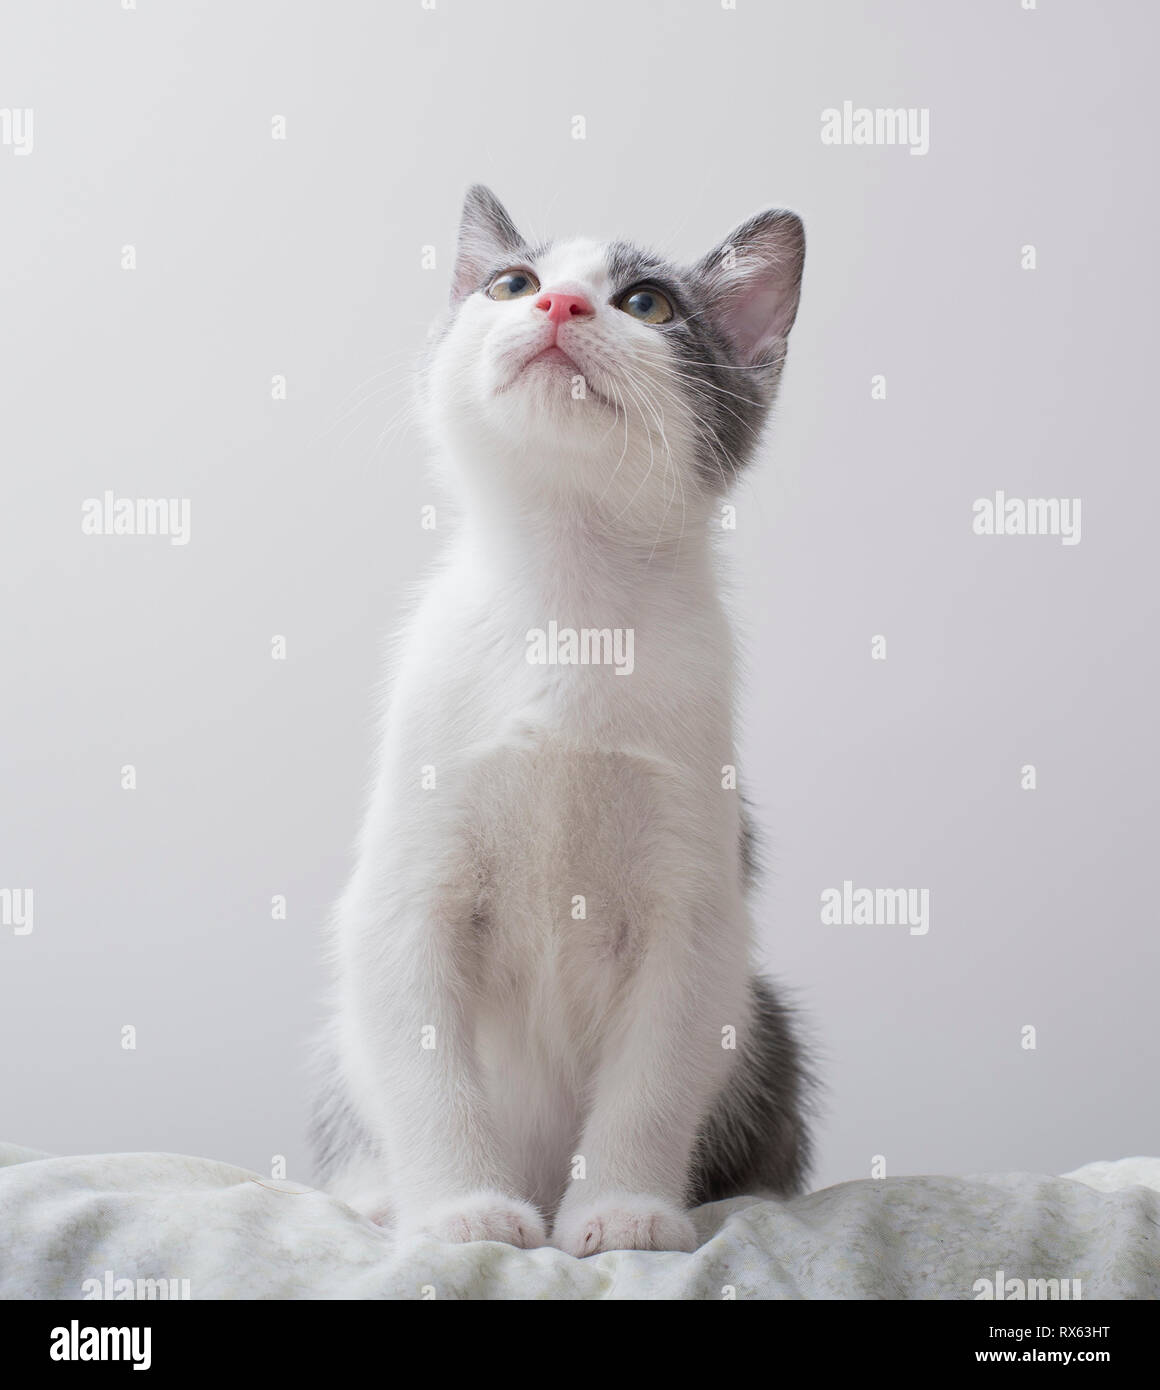 Low angle view of cat looking away while sitting on bed against white wall Stock Photo